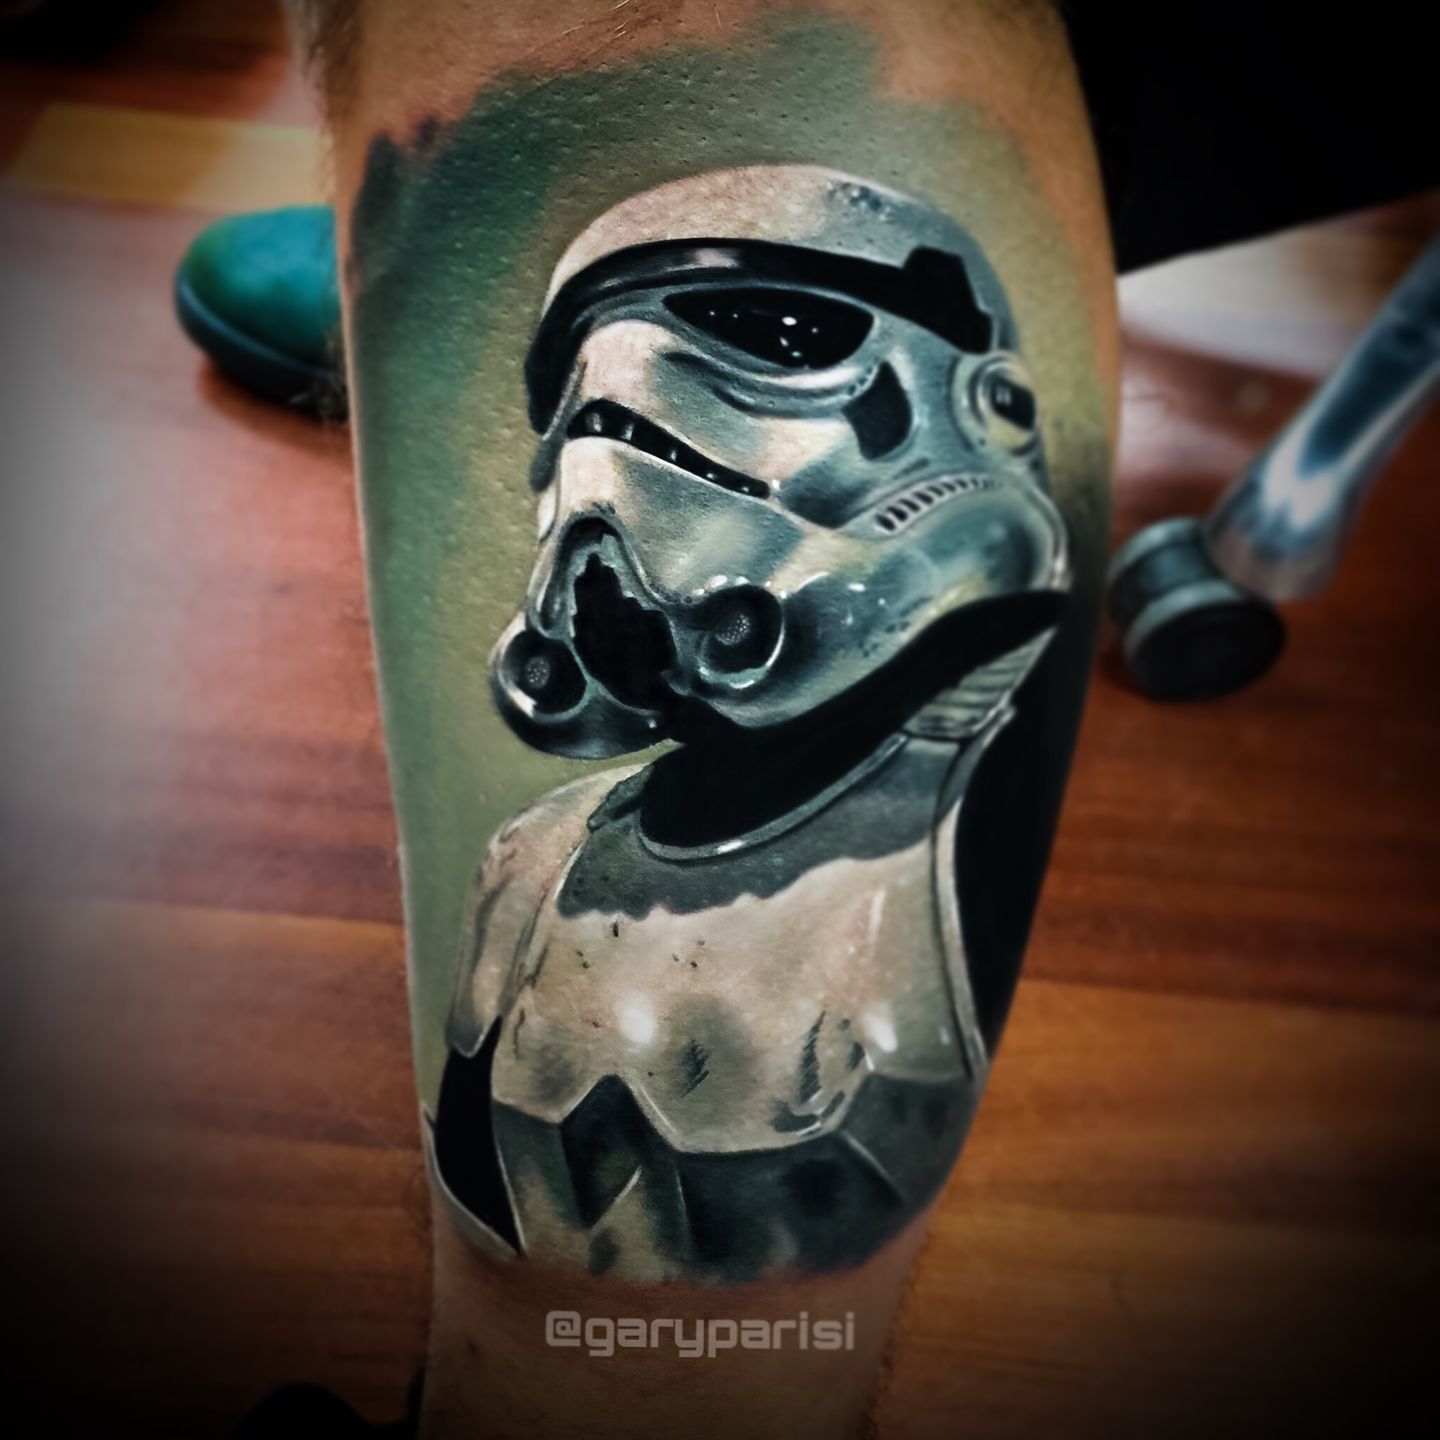 Got a First Order Stormtrooper tattoo yesterday Stoked with how it came  out  9GAG